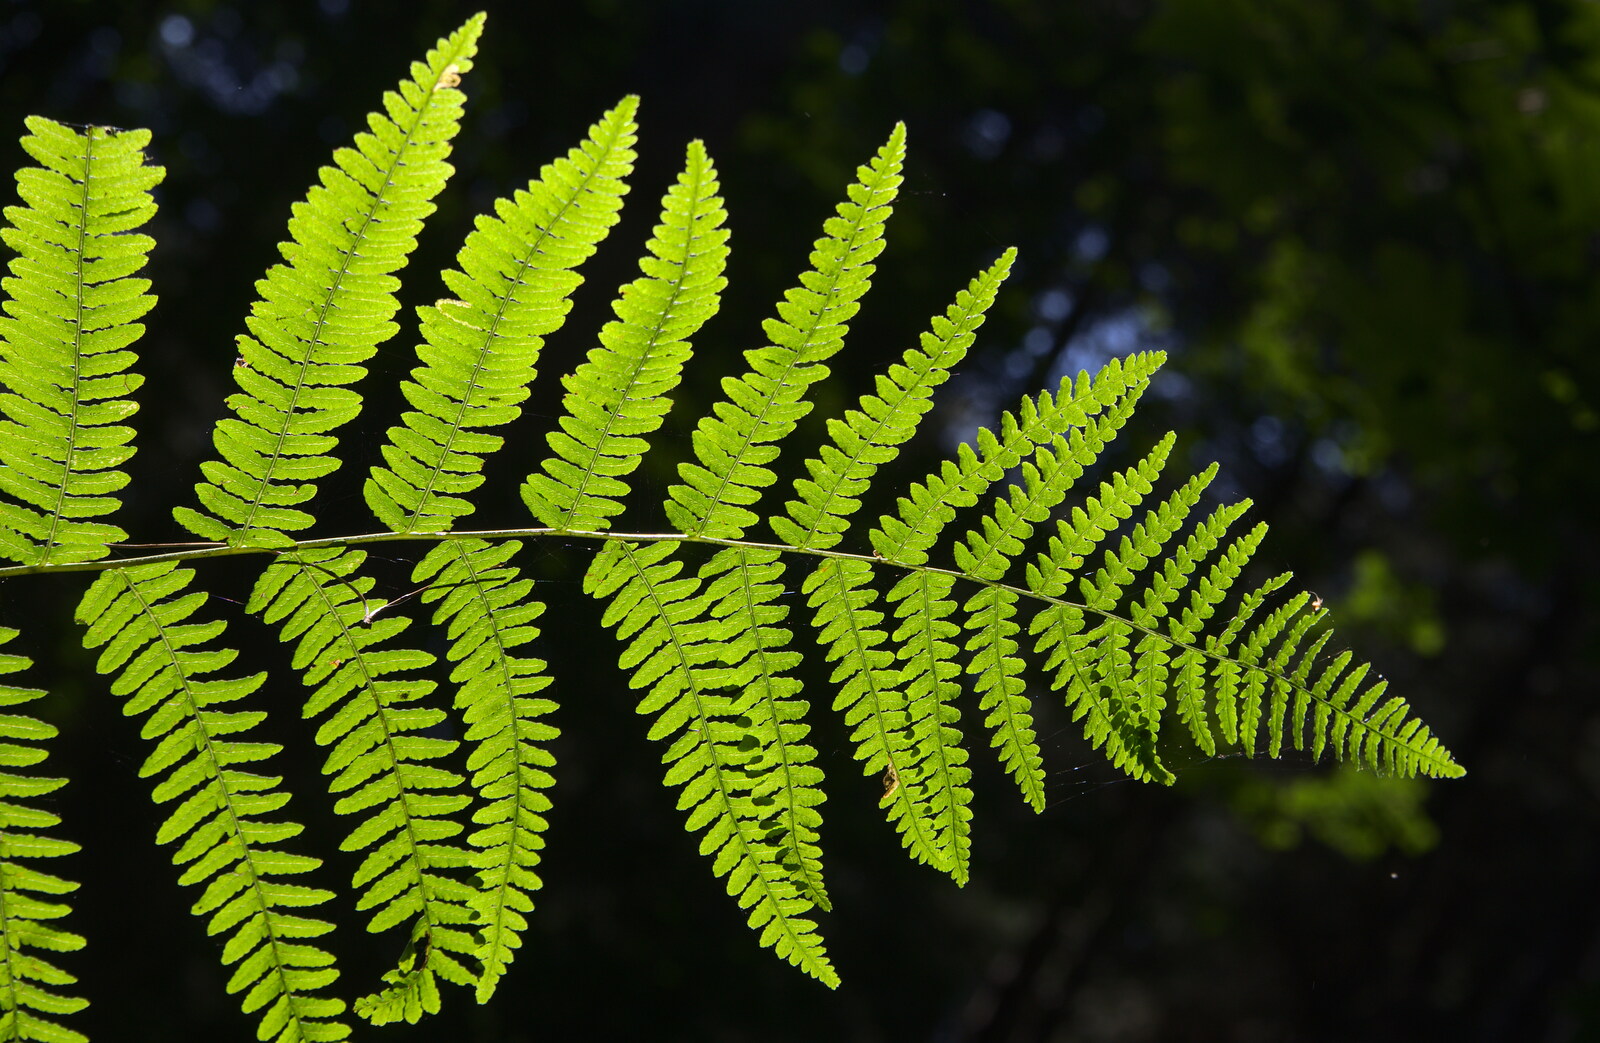 Back-lit fern from The Archaeology of Dunwich: A Camping Trip, Dunwich, Suffolk - 1st August 2015